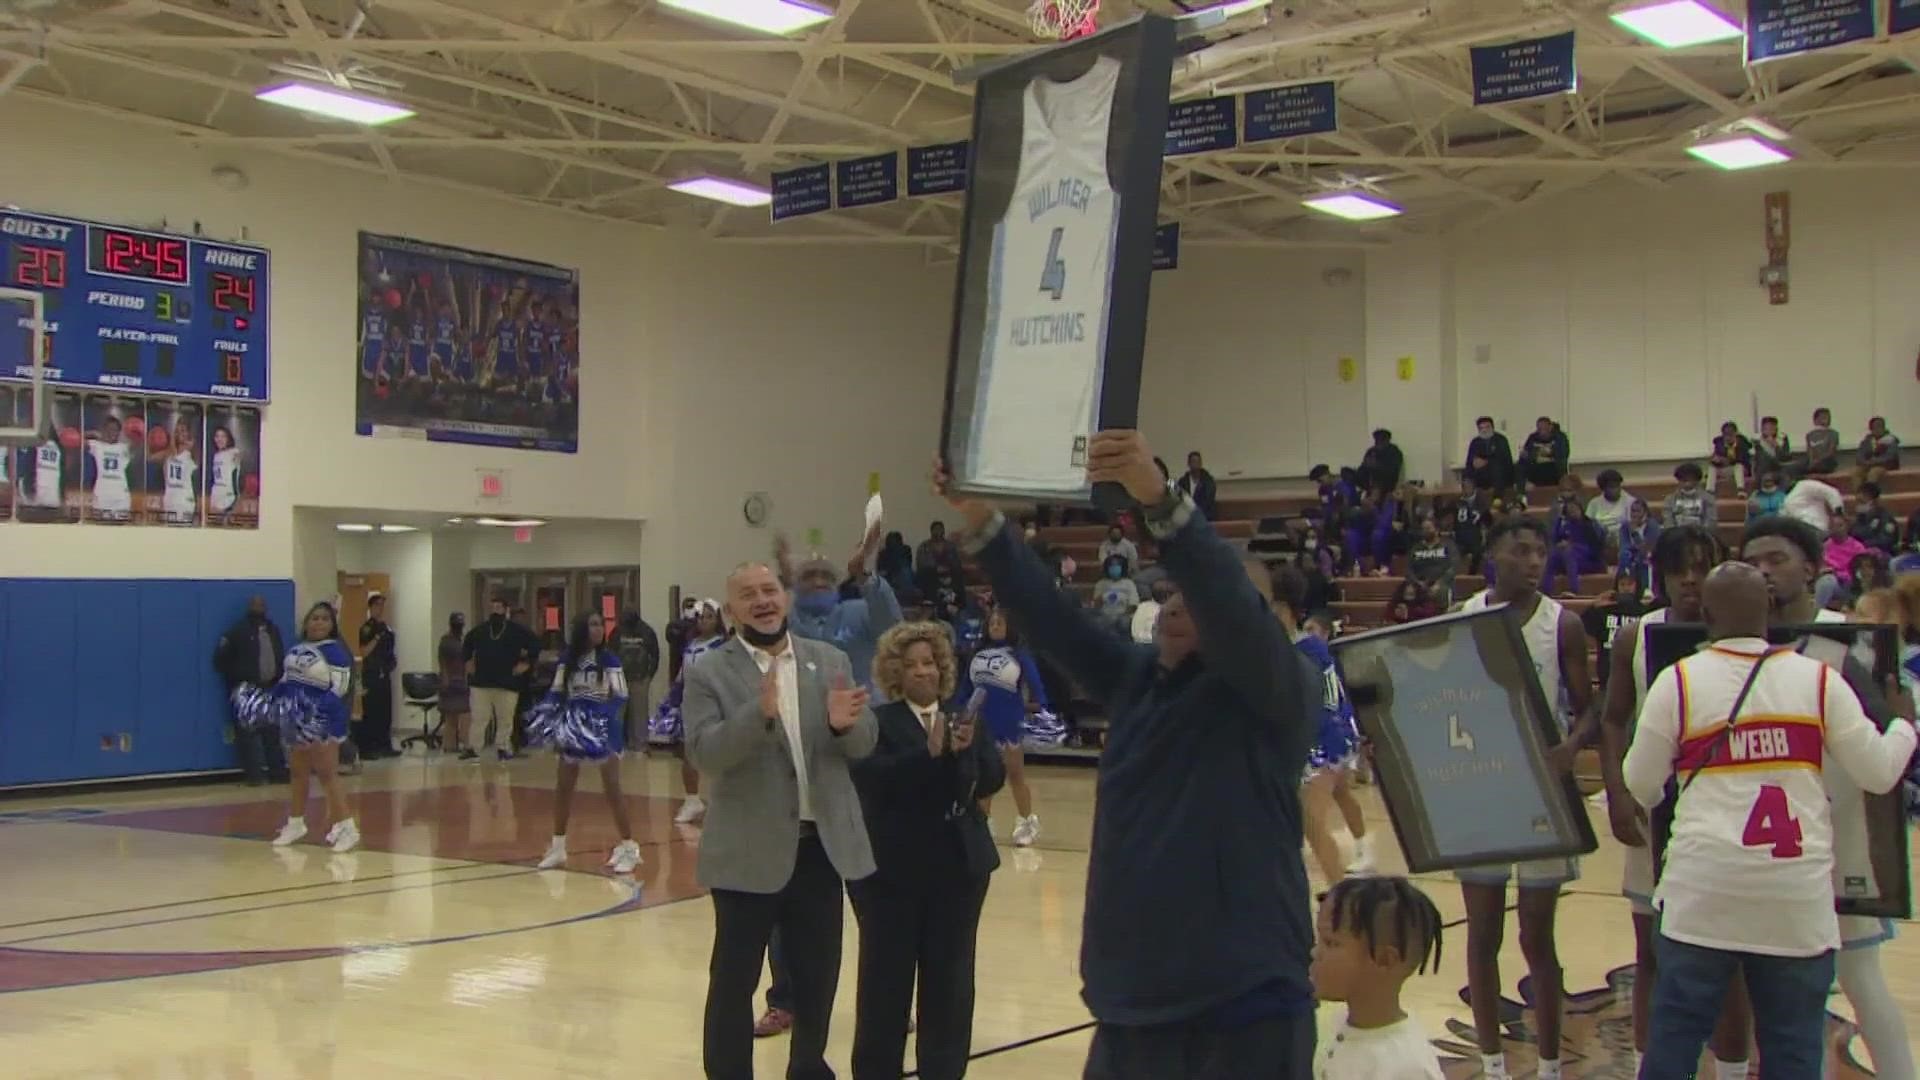 Dallas-area legend Spud Webb was the shortest man to ever win the NBA's Slam Dunk Contest. Now his #4 is retired at his alma mater